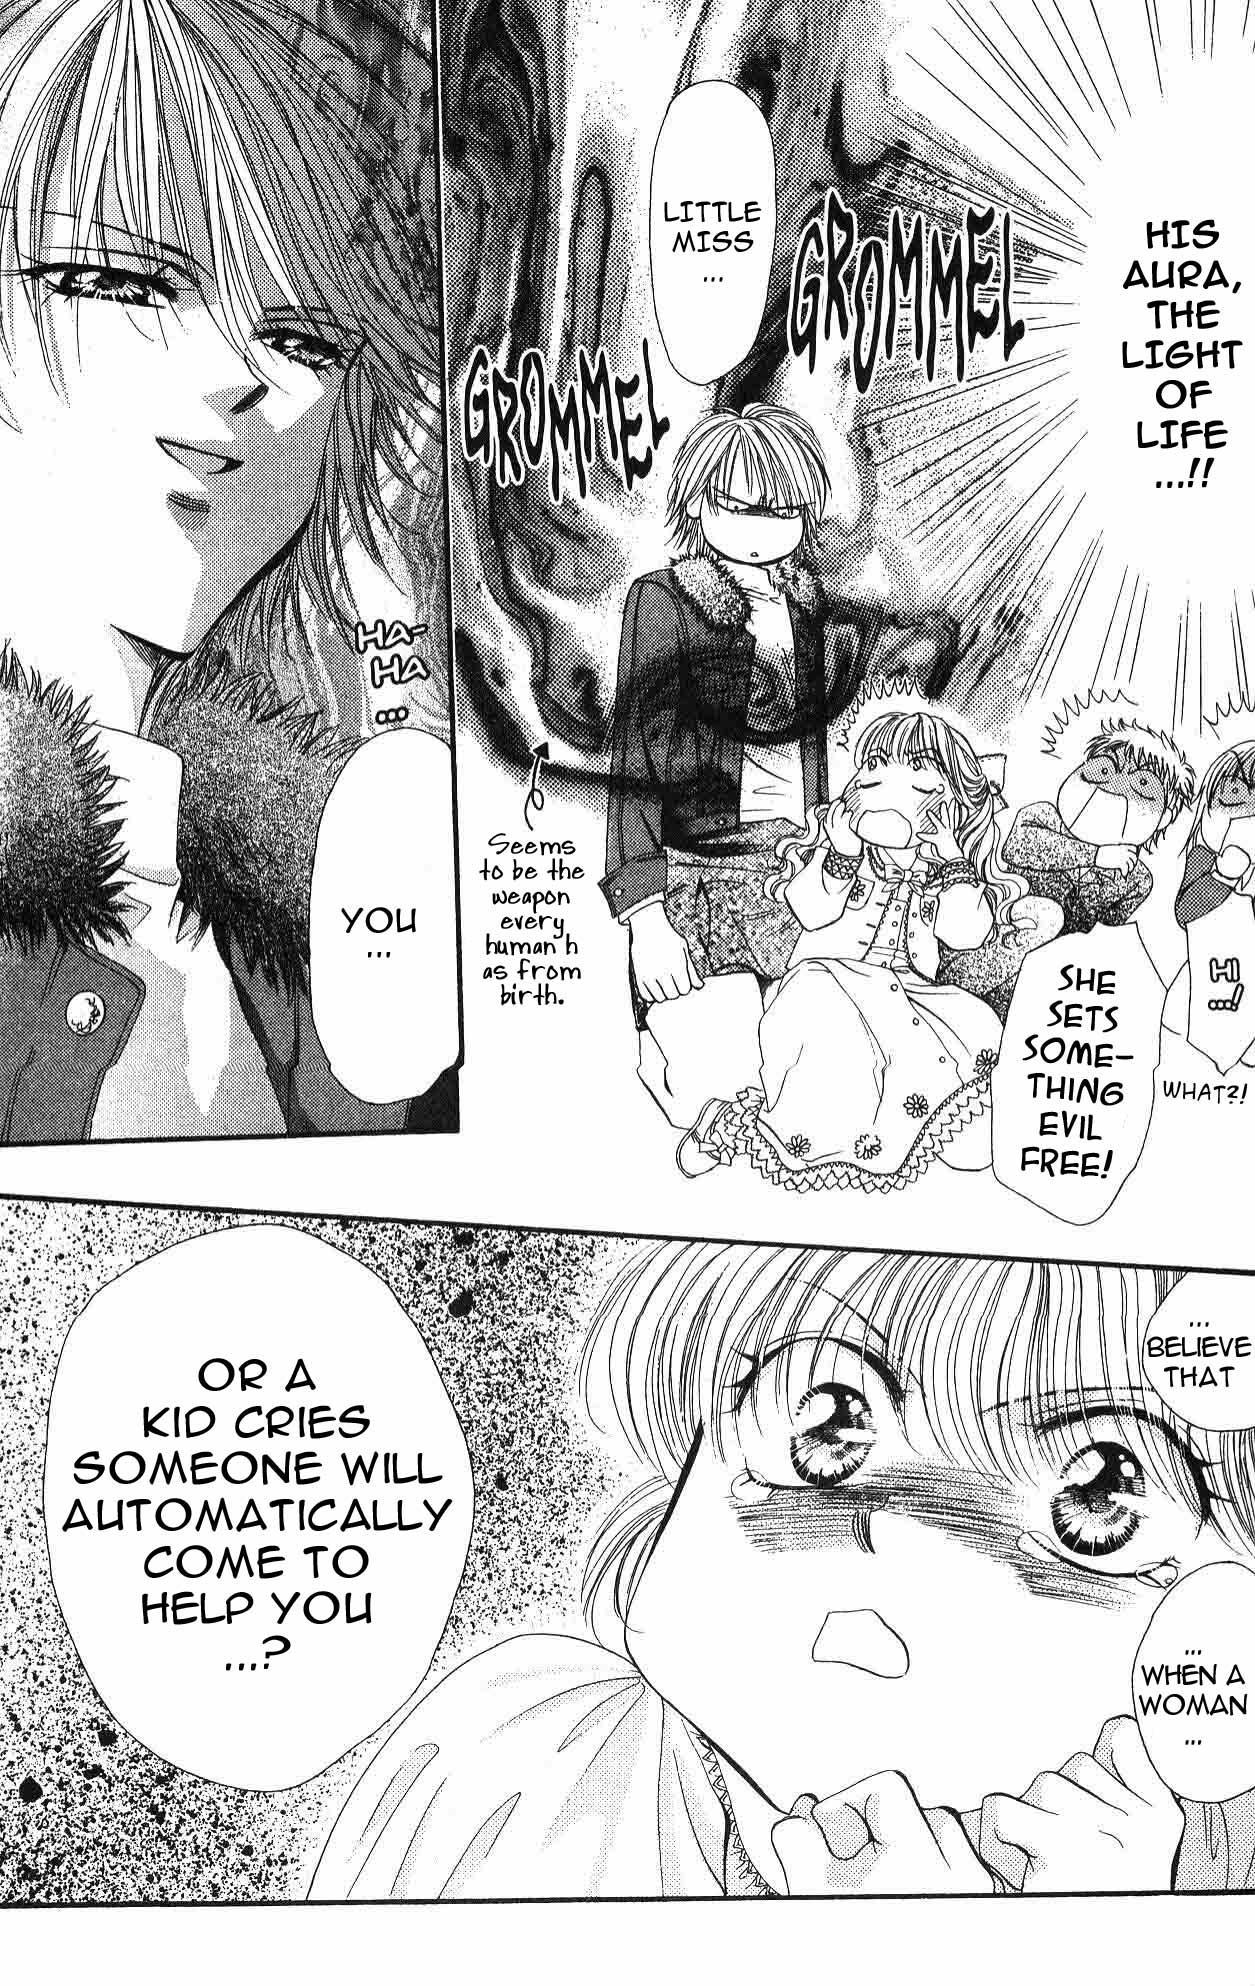 Skip Beat!, Chapter 3 The Feast of Horror, part 1 image 19